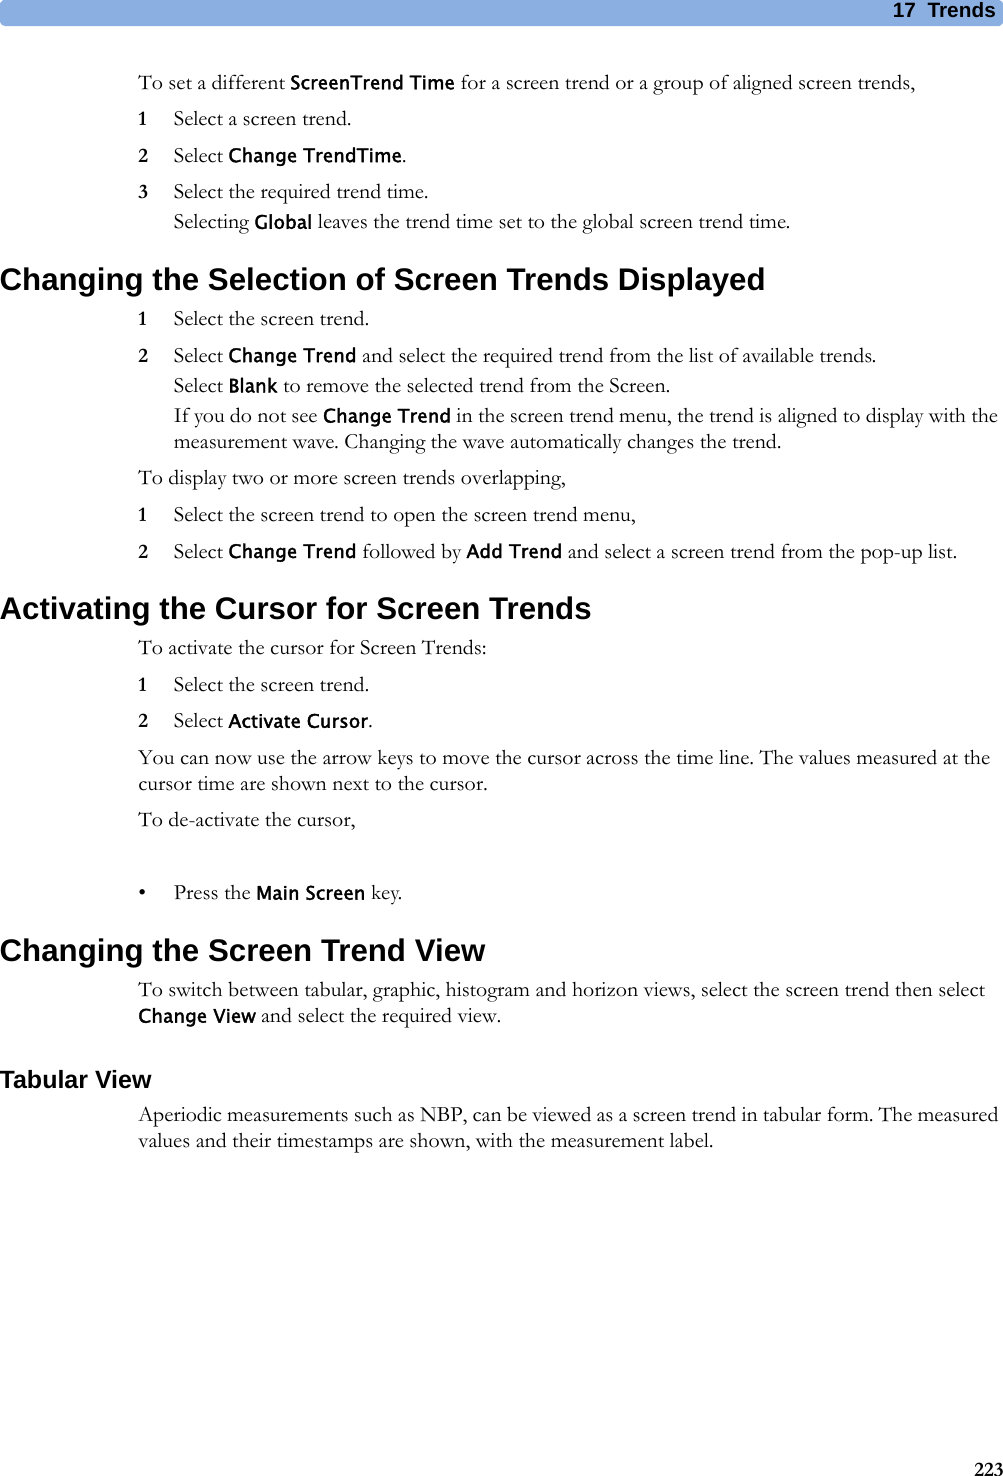 17 Trends223To set a different ScreenTrend Time for a screen trend or a group of aligned screen trends,1Select a screen trend.2Select Change TrendTime.3Select the required trend time.Selecting Global leaves the trend time set to the global screen trend time.Changing the Selection of Screen Trends Displayed1Select the screen trend.2Select Change Trend and select the required trend from the list of available trends.Select Blank to remove the selected trend from the Screen.If you do not see Change Trend in the screen trend menu, the trend is aligned to display with the measurement wave. Changing the wave automatically changes the trend.To display two or more screen trends overlapping,1Select the screen trend to open the screen trend menu,2Select Change Trend followed by Add Trend and select a screen trend from the pop-up list.Activating the Cursor for Screen TrendsTo activate the cursor for Screen Trends:1Select the screen trend.2Select Activate Cursor.You can now use the arrow keys to move the cursor across the time line. The values measured at the cursor time are shown next to the cursor.To de-activate the cursor,• Press the Main Screen key.Changing the Screen Trend ViewTo switch between tabular, graphic, histogram and horizon views, select the screen trend then select Change View and select the required view.Tabular ViewAperiodic measurements such as NBP, can be viewed as a screen trend in tabular form. The measured values and their timestamps are shown, with the measurement label.